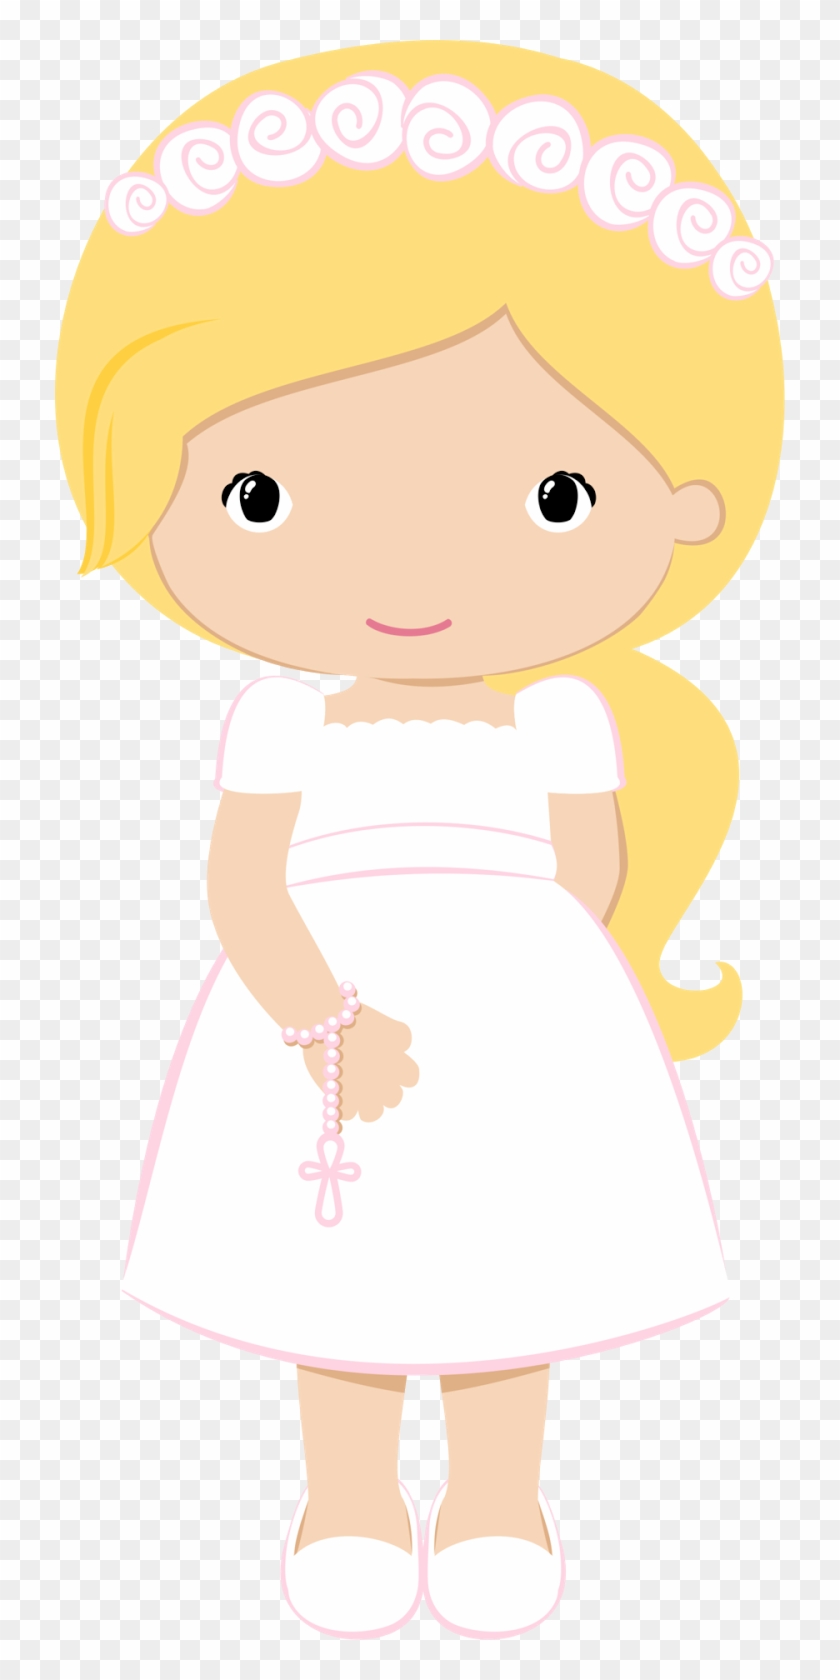 Girls In Pink For Their First Communion - Communion Girl Clip Art #450718